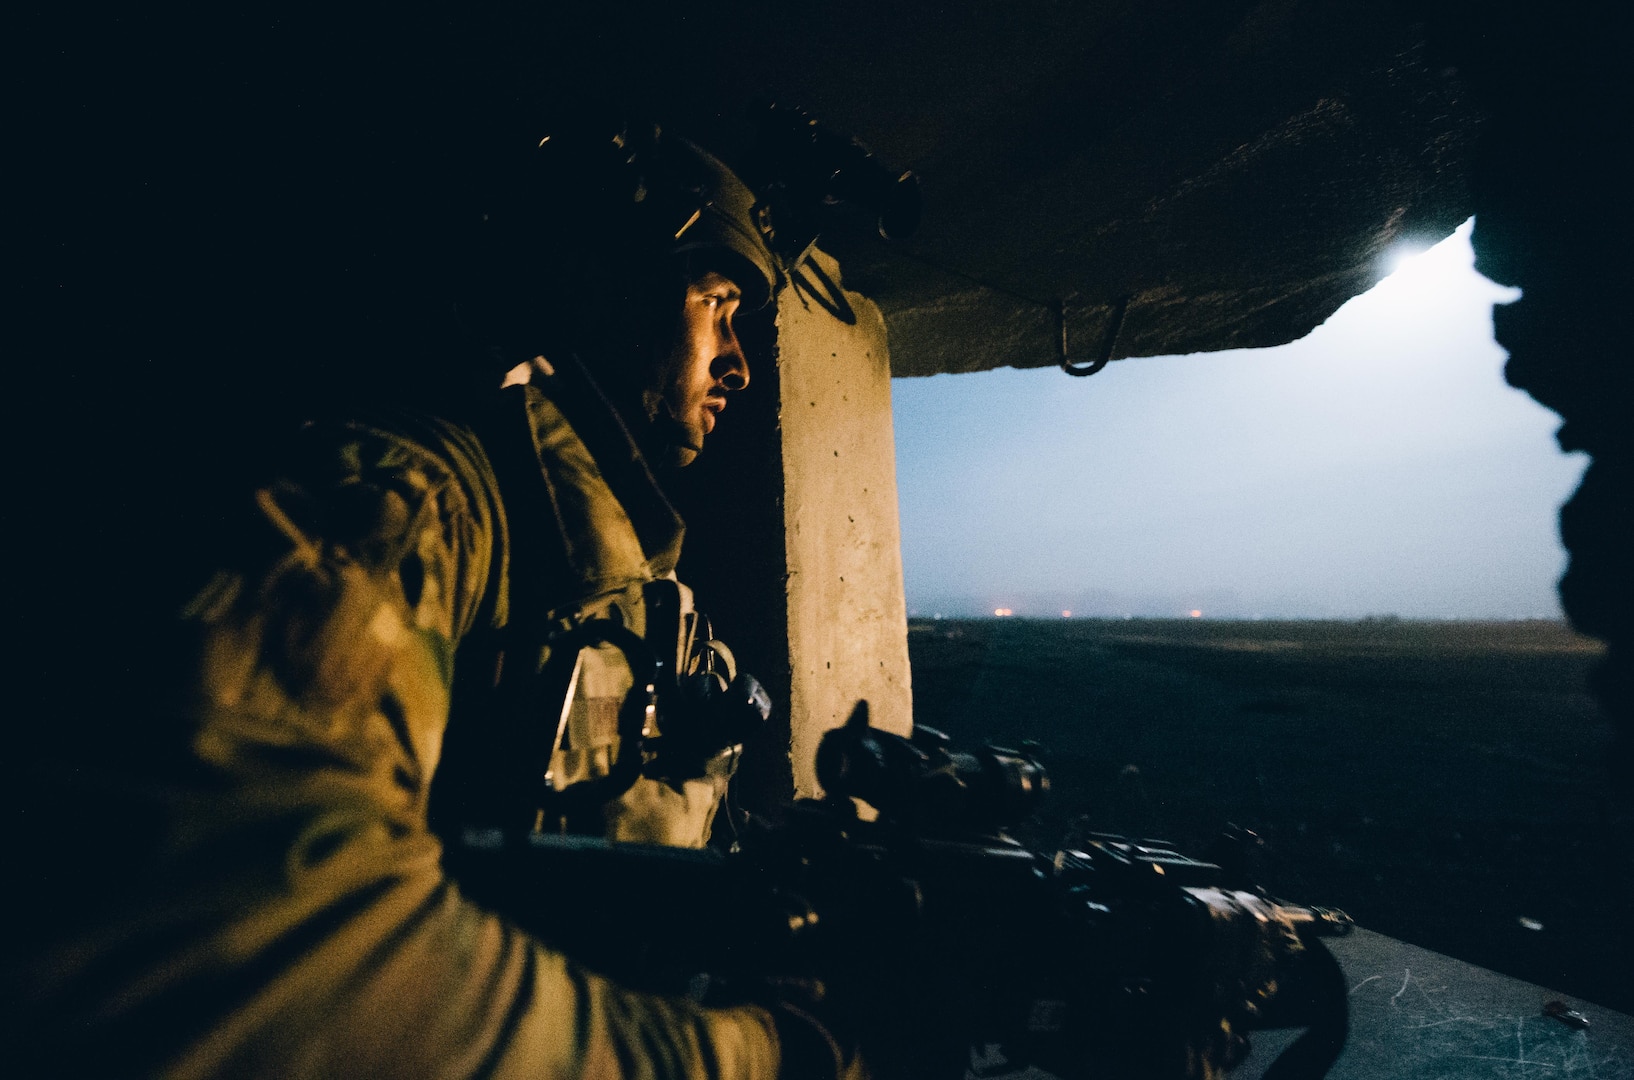 Senior Airman Ralph Hoeflich, 821st Contingency Response Group close precision engagement airman, scans a field illuminated by a flare from inside a defensive fighting position at Qayyarah West Airfield, Iraq, in support of Combined Joint Task Force - Operation Inherent Resolve, Nov. 14, 2016. The 821st CRG is highly-specialized in training and rapidly deploying personnel to quickly open airfields and establish, expand, sustain and coordinate air operations in austere, bare-base conditions. (U.S. Air Force photo by Senior Airman Jordan Castelan)